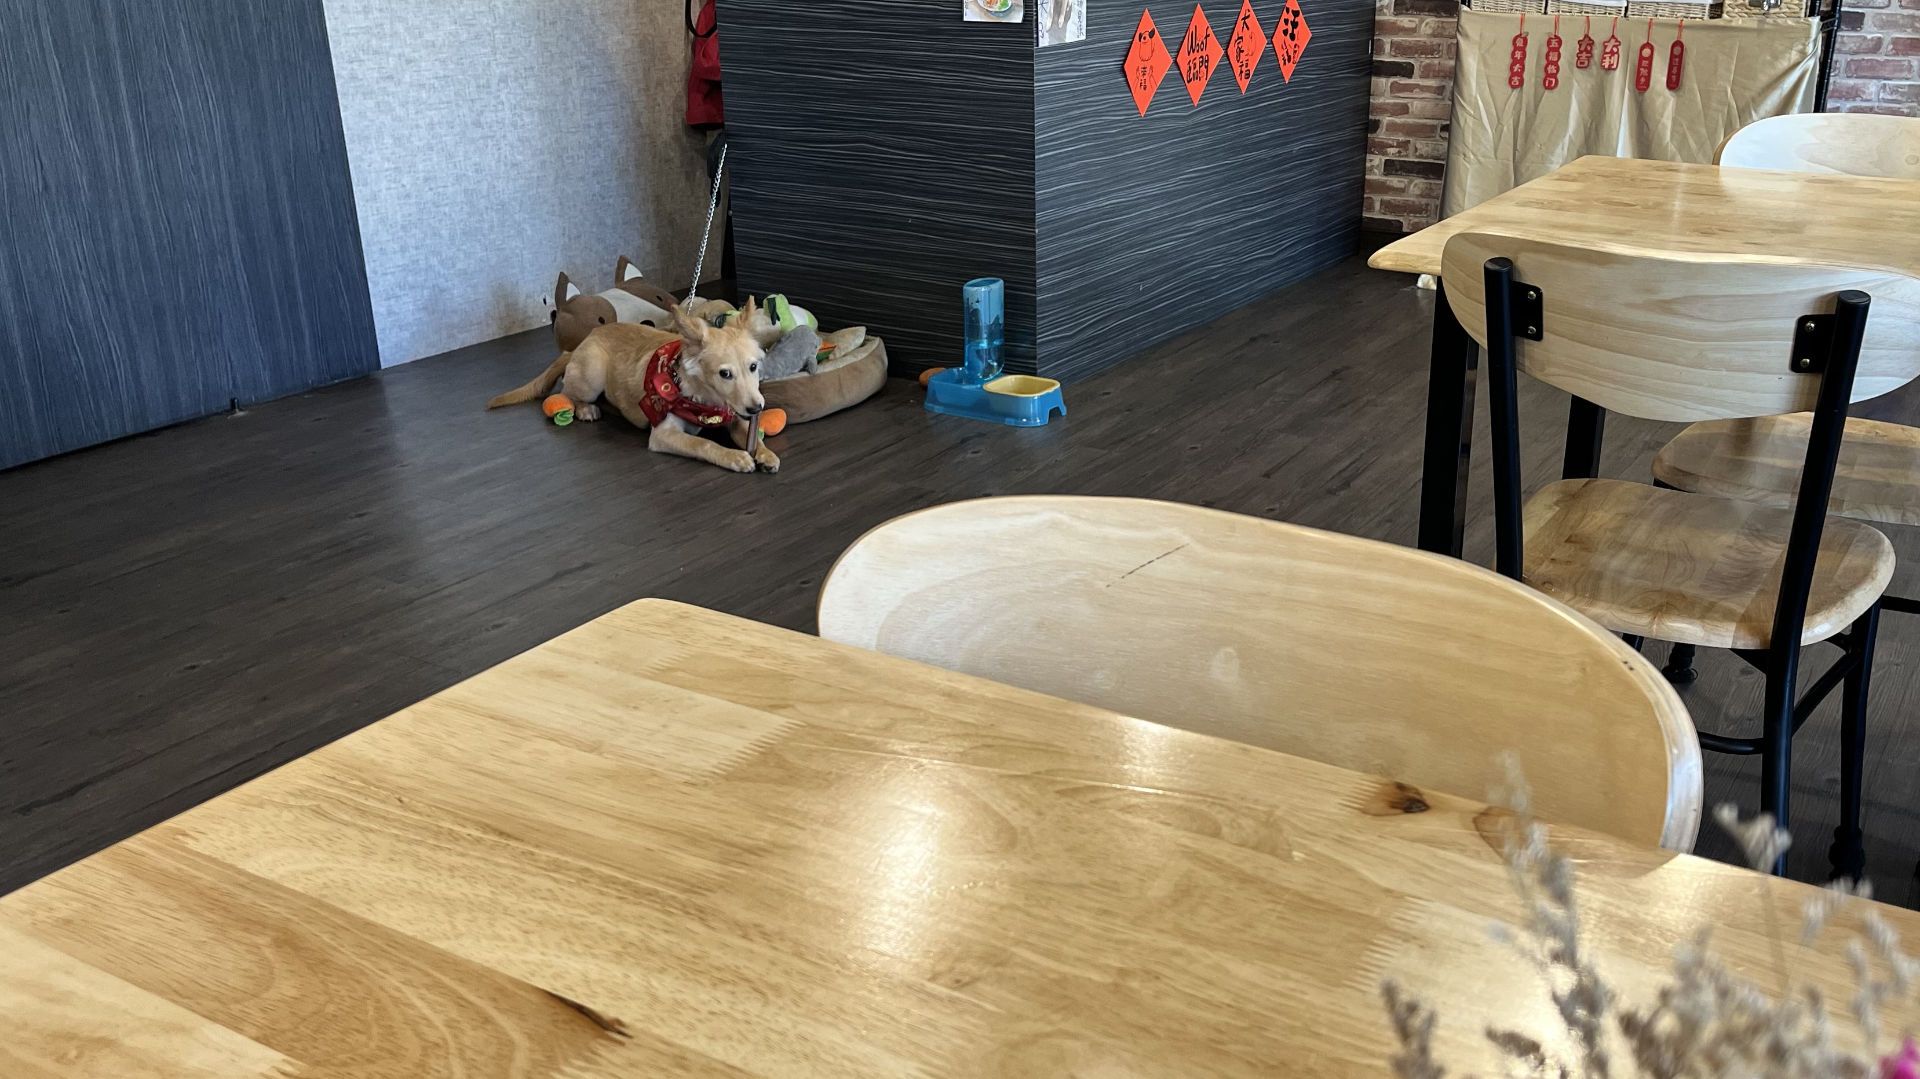 A young dog chewing on a toy next to the cafe counter.